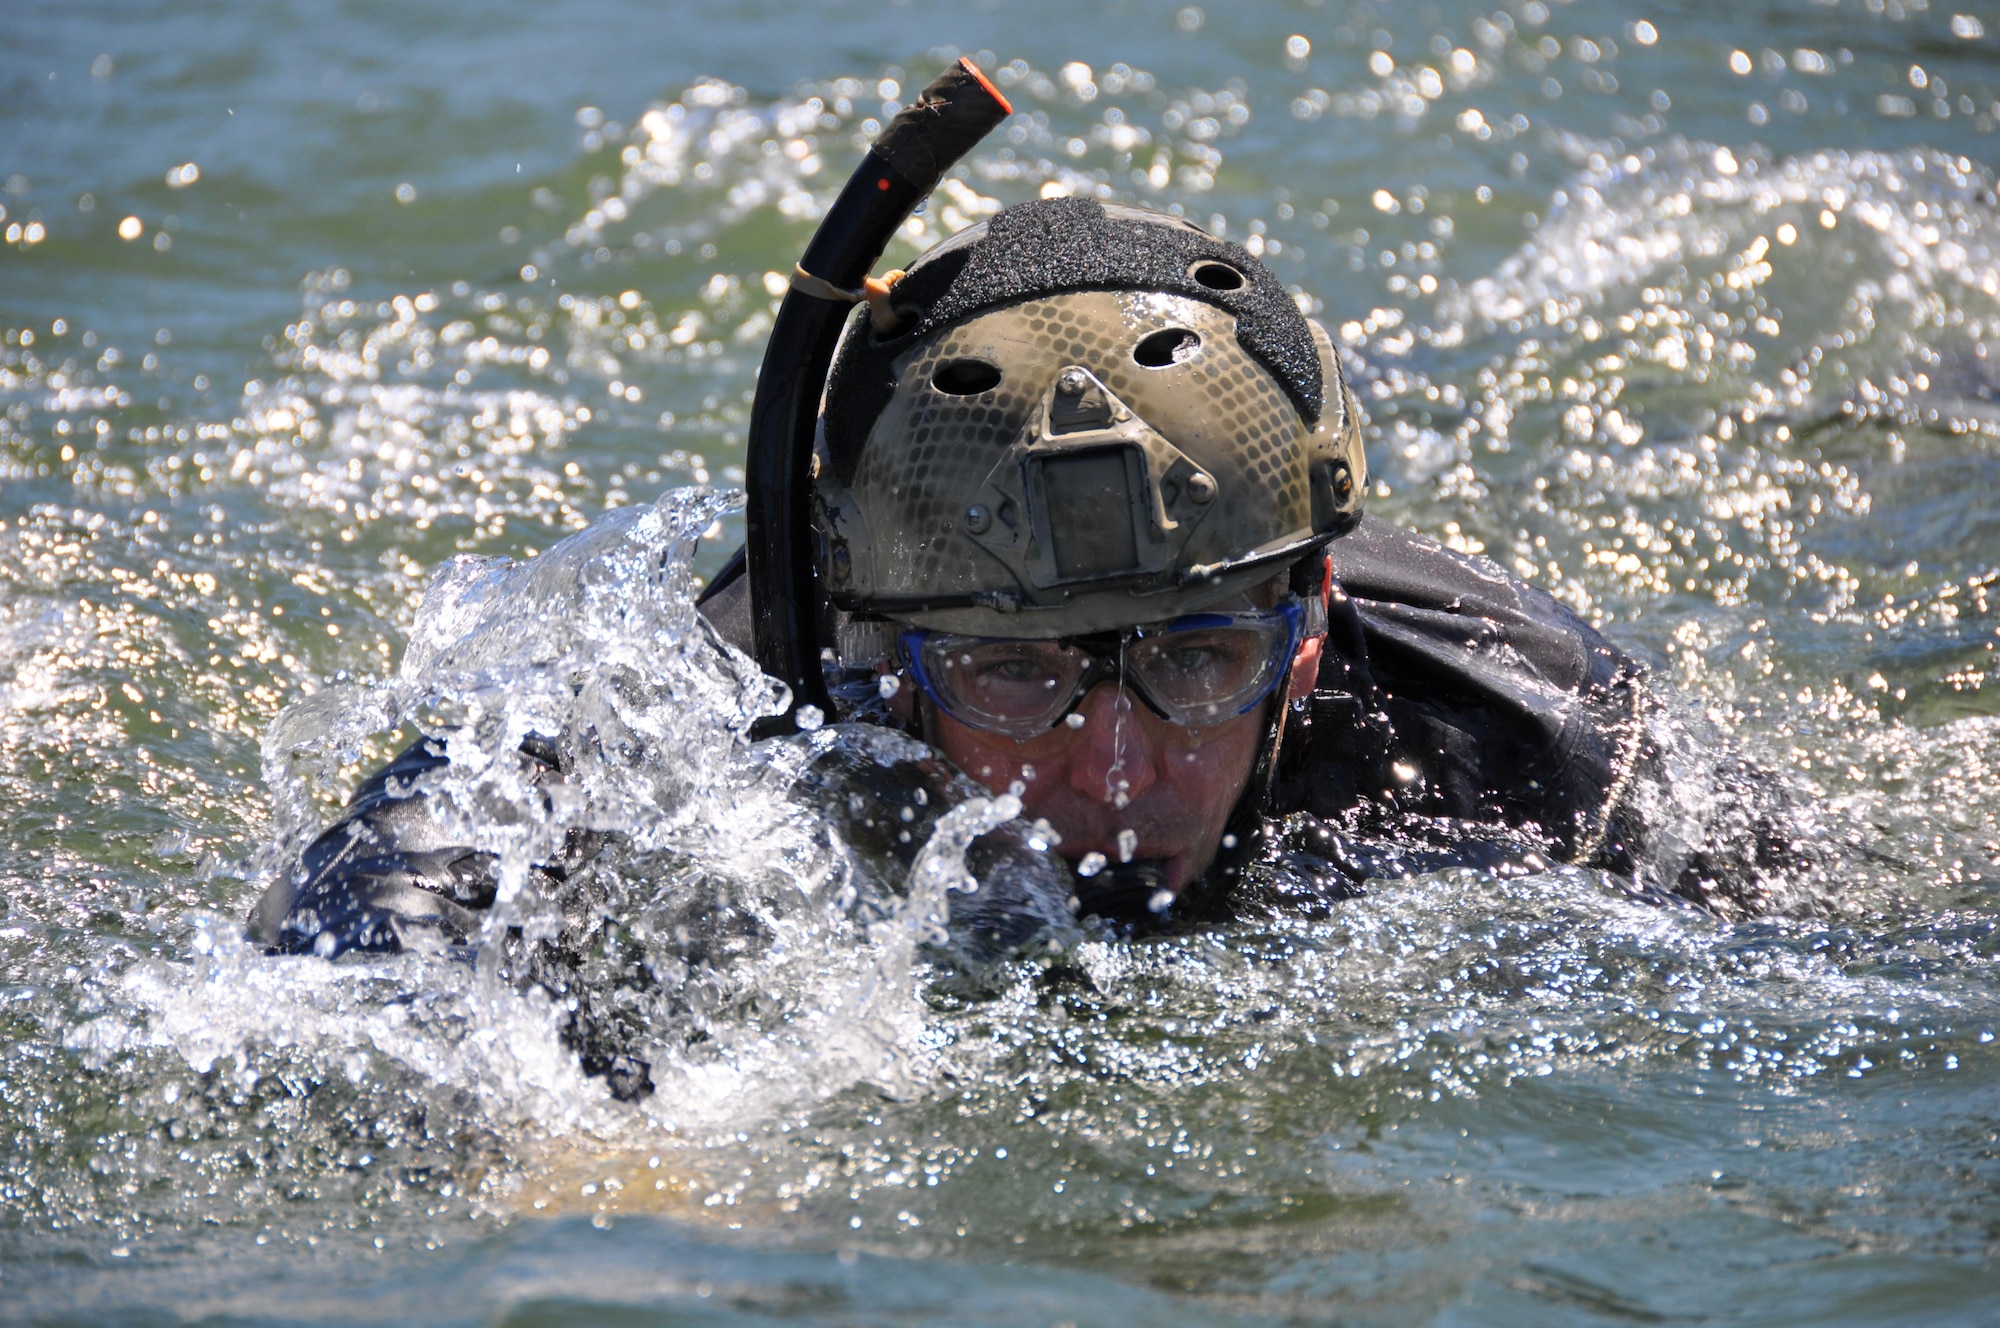 Air Force Reserve Tech. Sgt. Lucas Martin, a pararescueman from the 304th Rescue Squadron, Portland International Airport, Oregon, participates in water rescue training in the Columbia River, near Rooster Rock State Park, Oregon, July 27, 2013. Pararescuemen from the 304th RQS regularly conduct water training to be ready to rescue in any environment. Combat rescue officers and PJs go through the same initial training pipeline before joining a search and rescue unit.